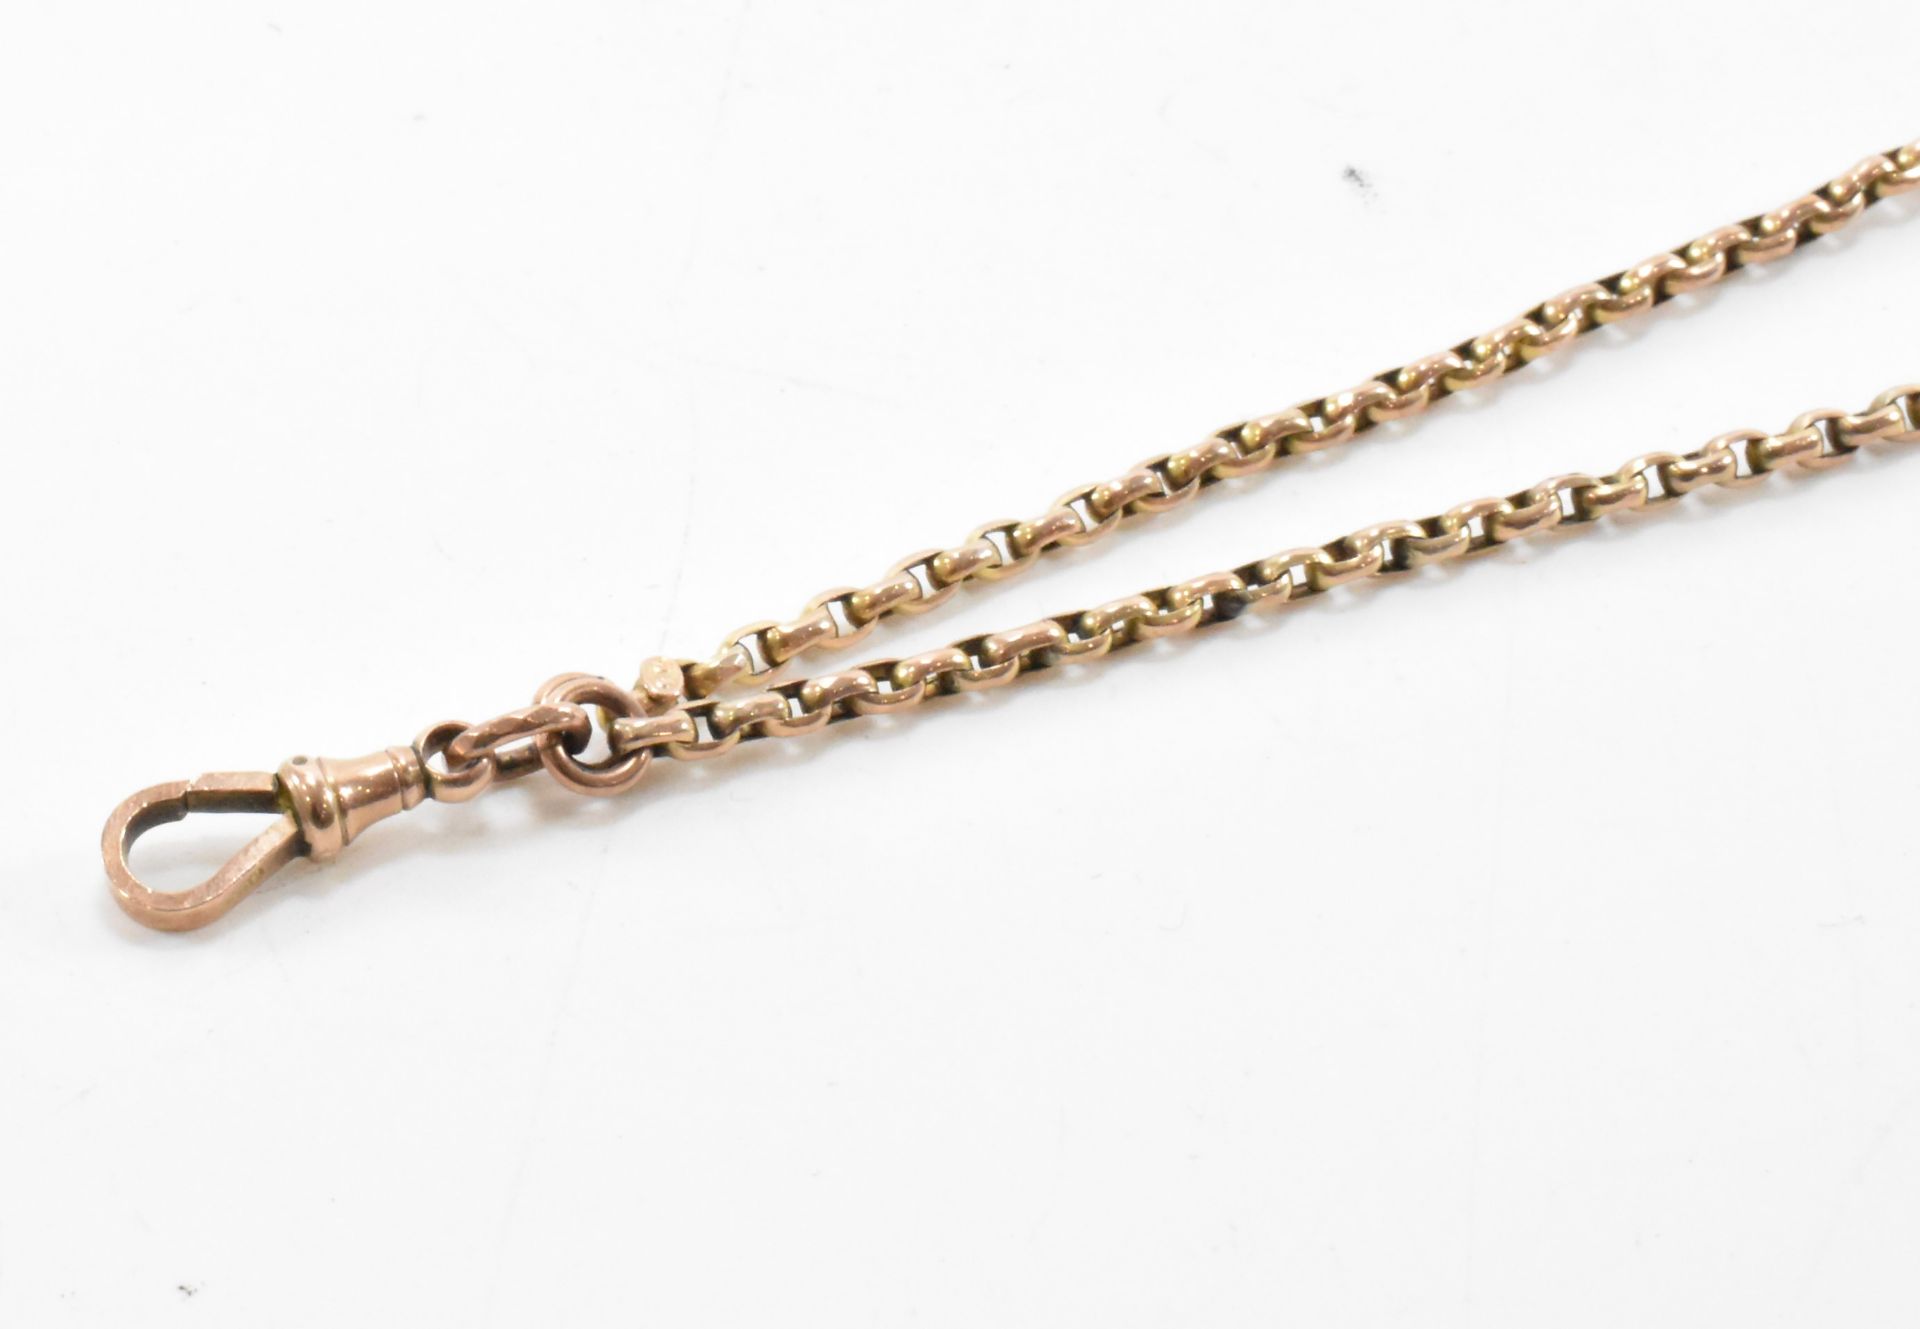 VICTORIAN YELLOW METAL LONG GUARD CHAIN - Image 4 of 5